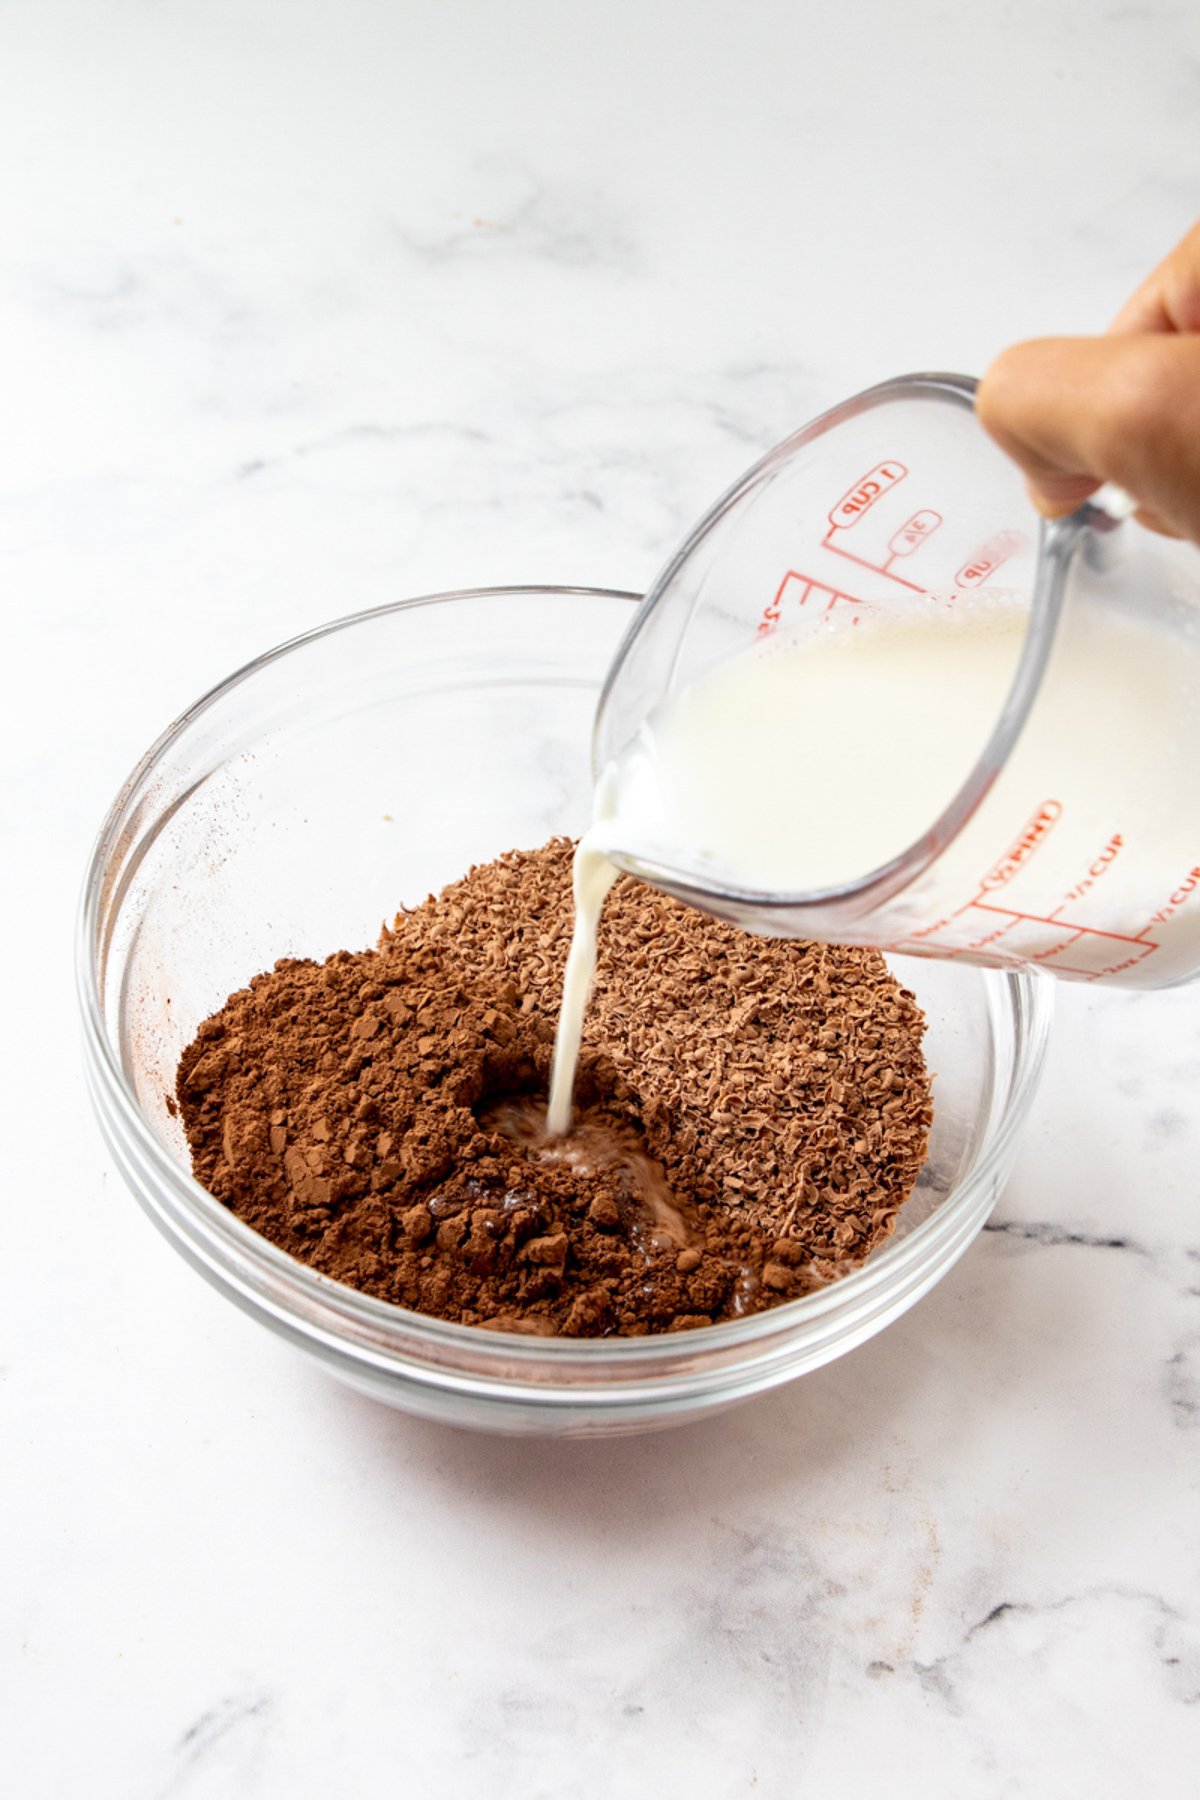 pouring milk into a bowl of grated chocolate and cocoa